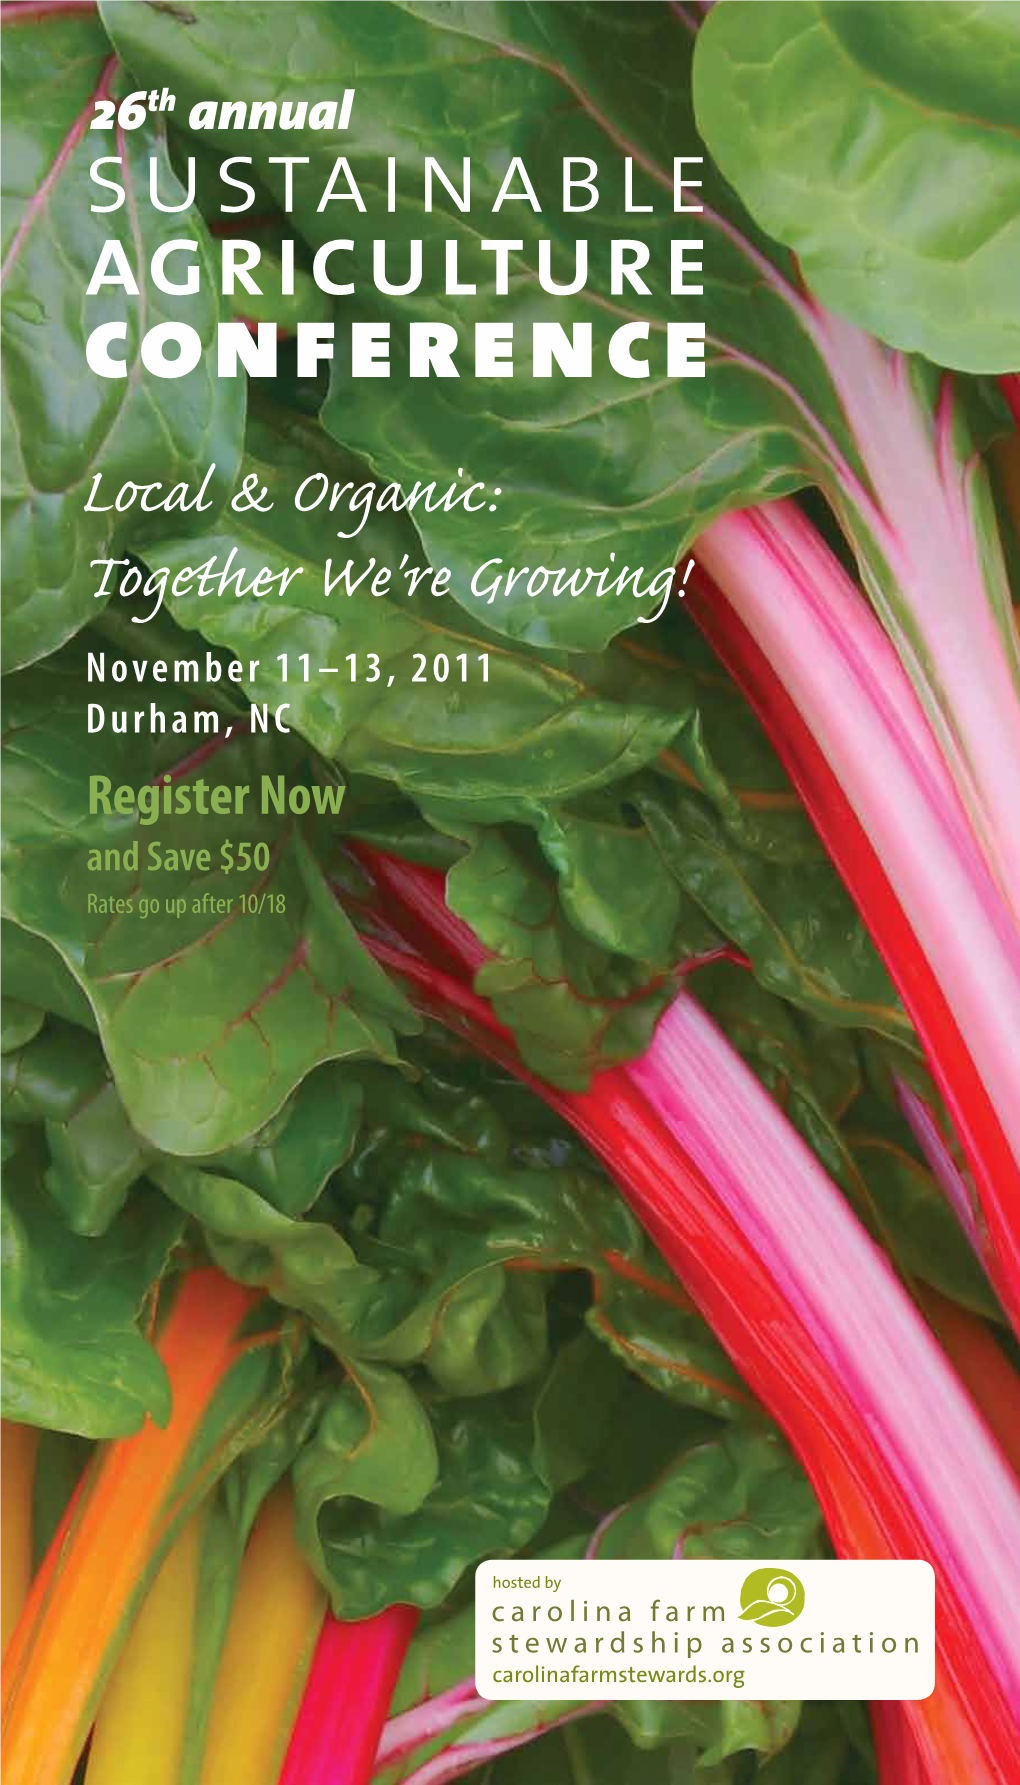 Local & Organic: Together We're Growing!